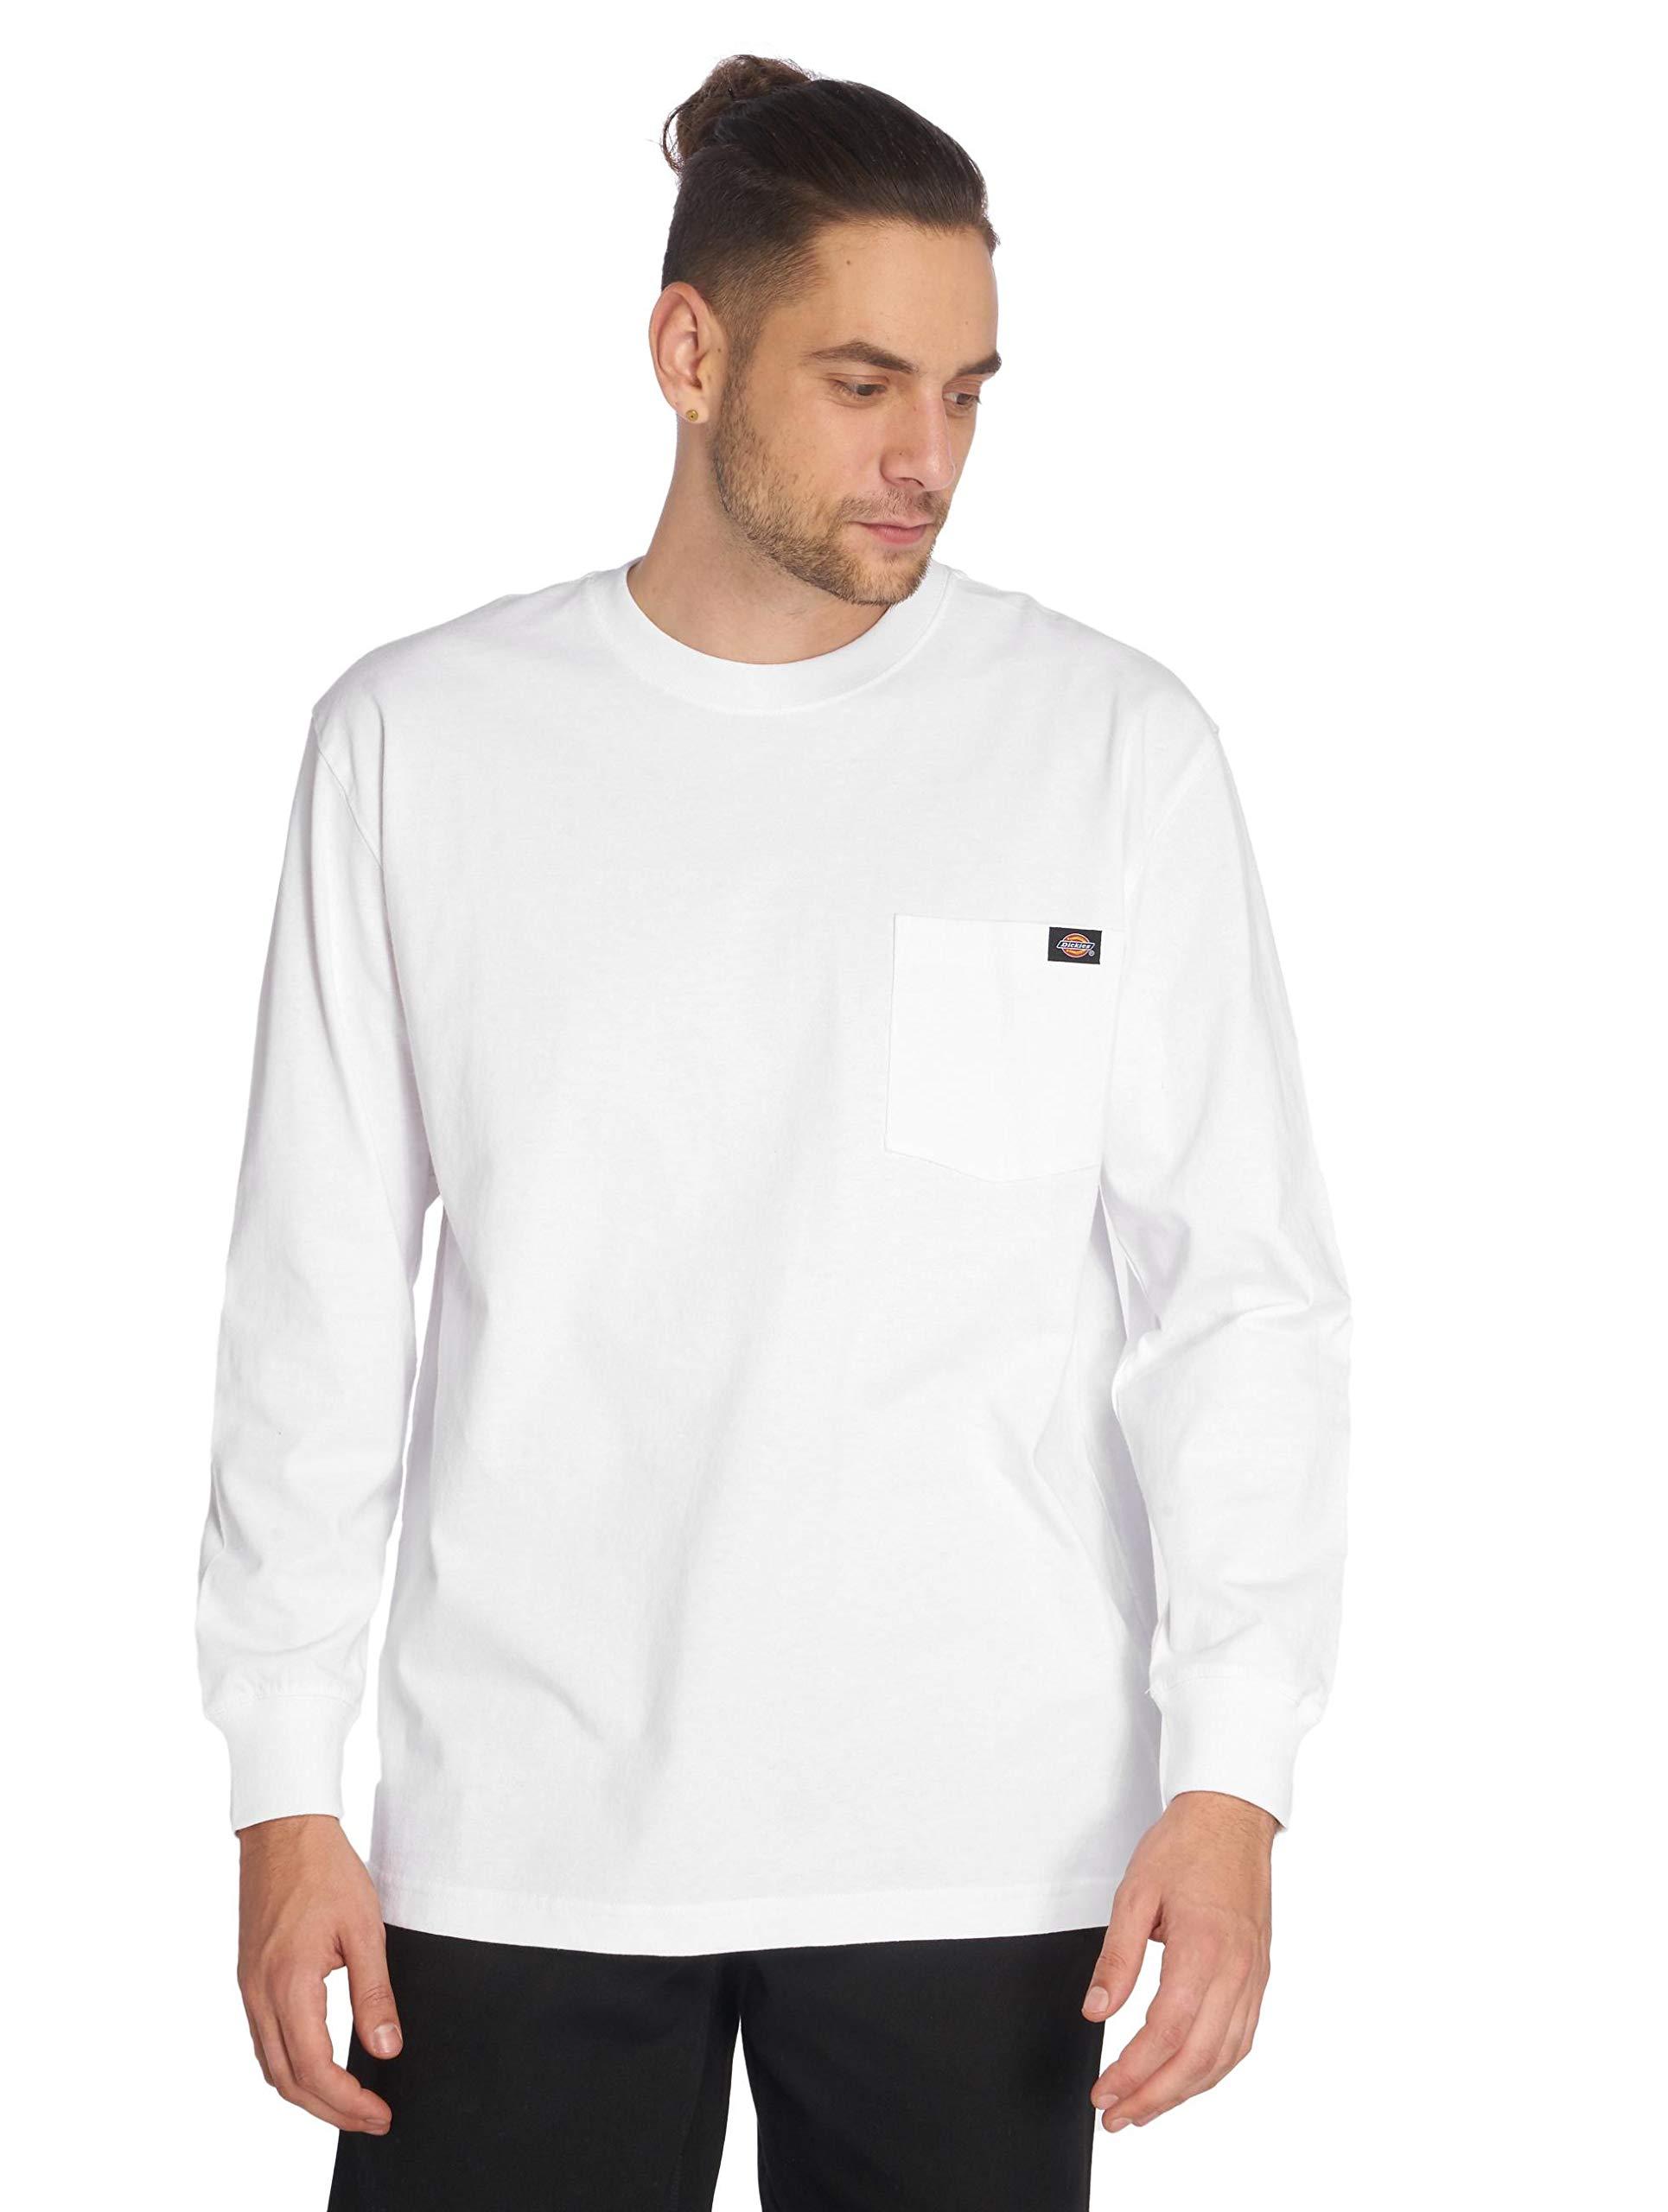 Dickies Long Sleeve Lyst in Heavyweight Crew | White Neck for Men